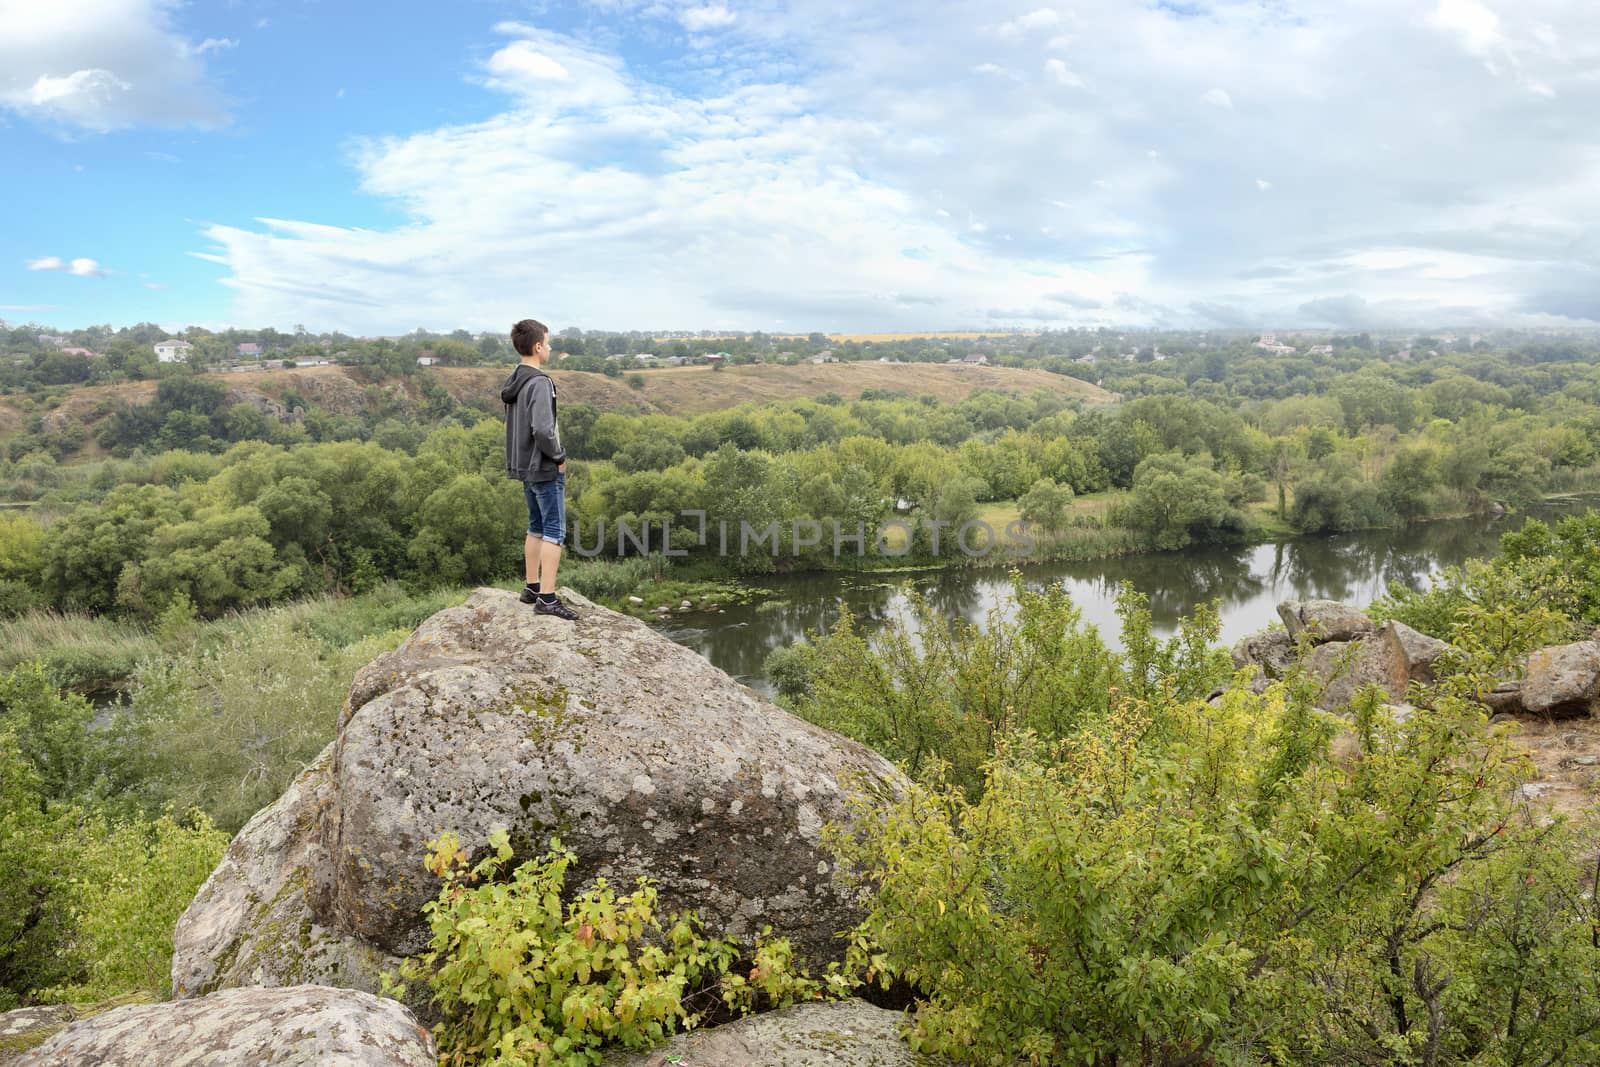 The teenager stands on top of a large stone boulder on the bank of the Southern Bug River and looks at the river below by Sergii